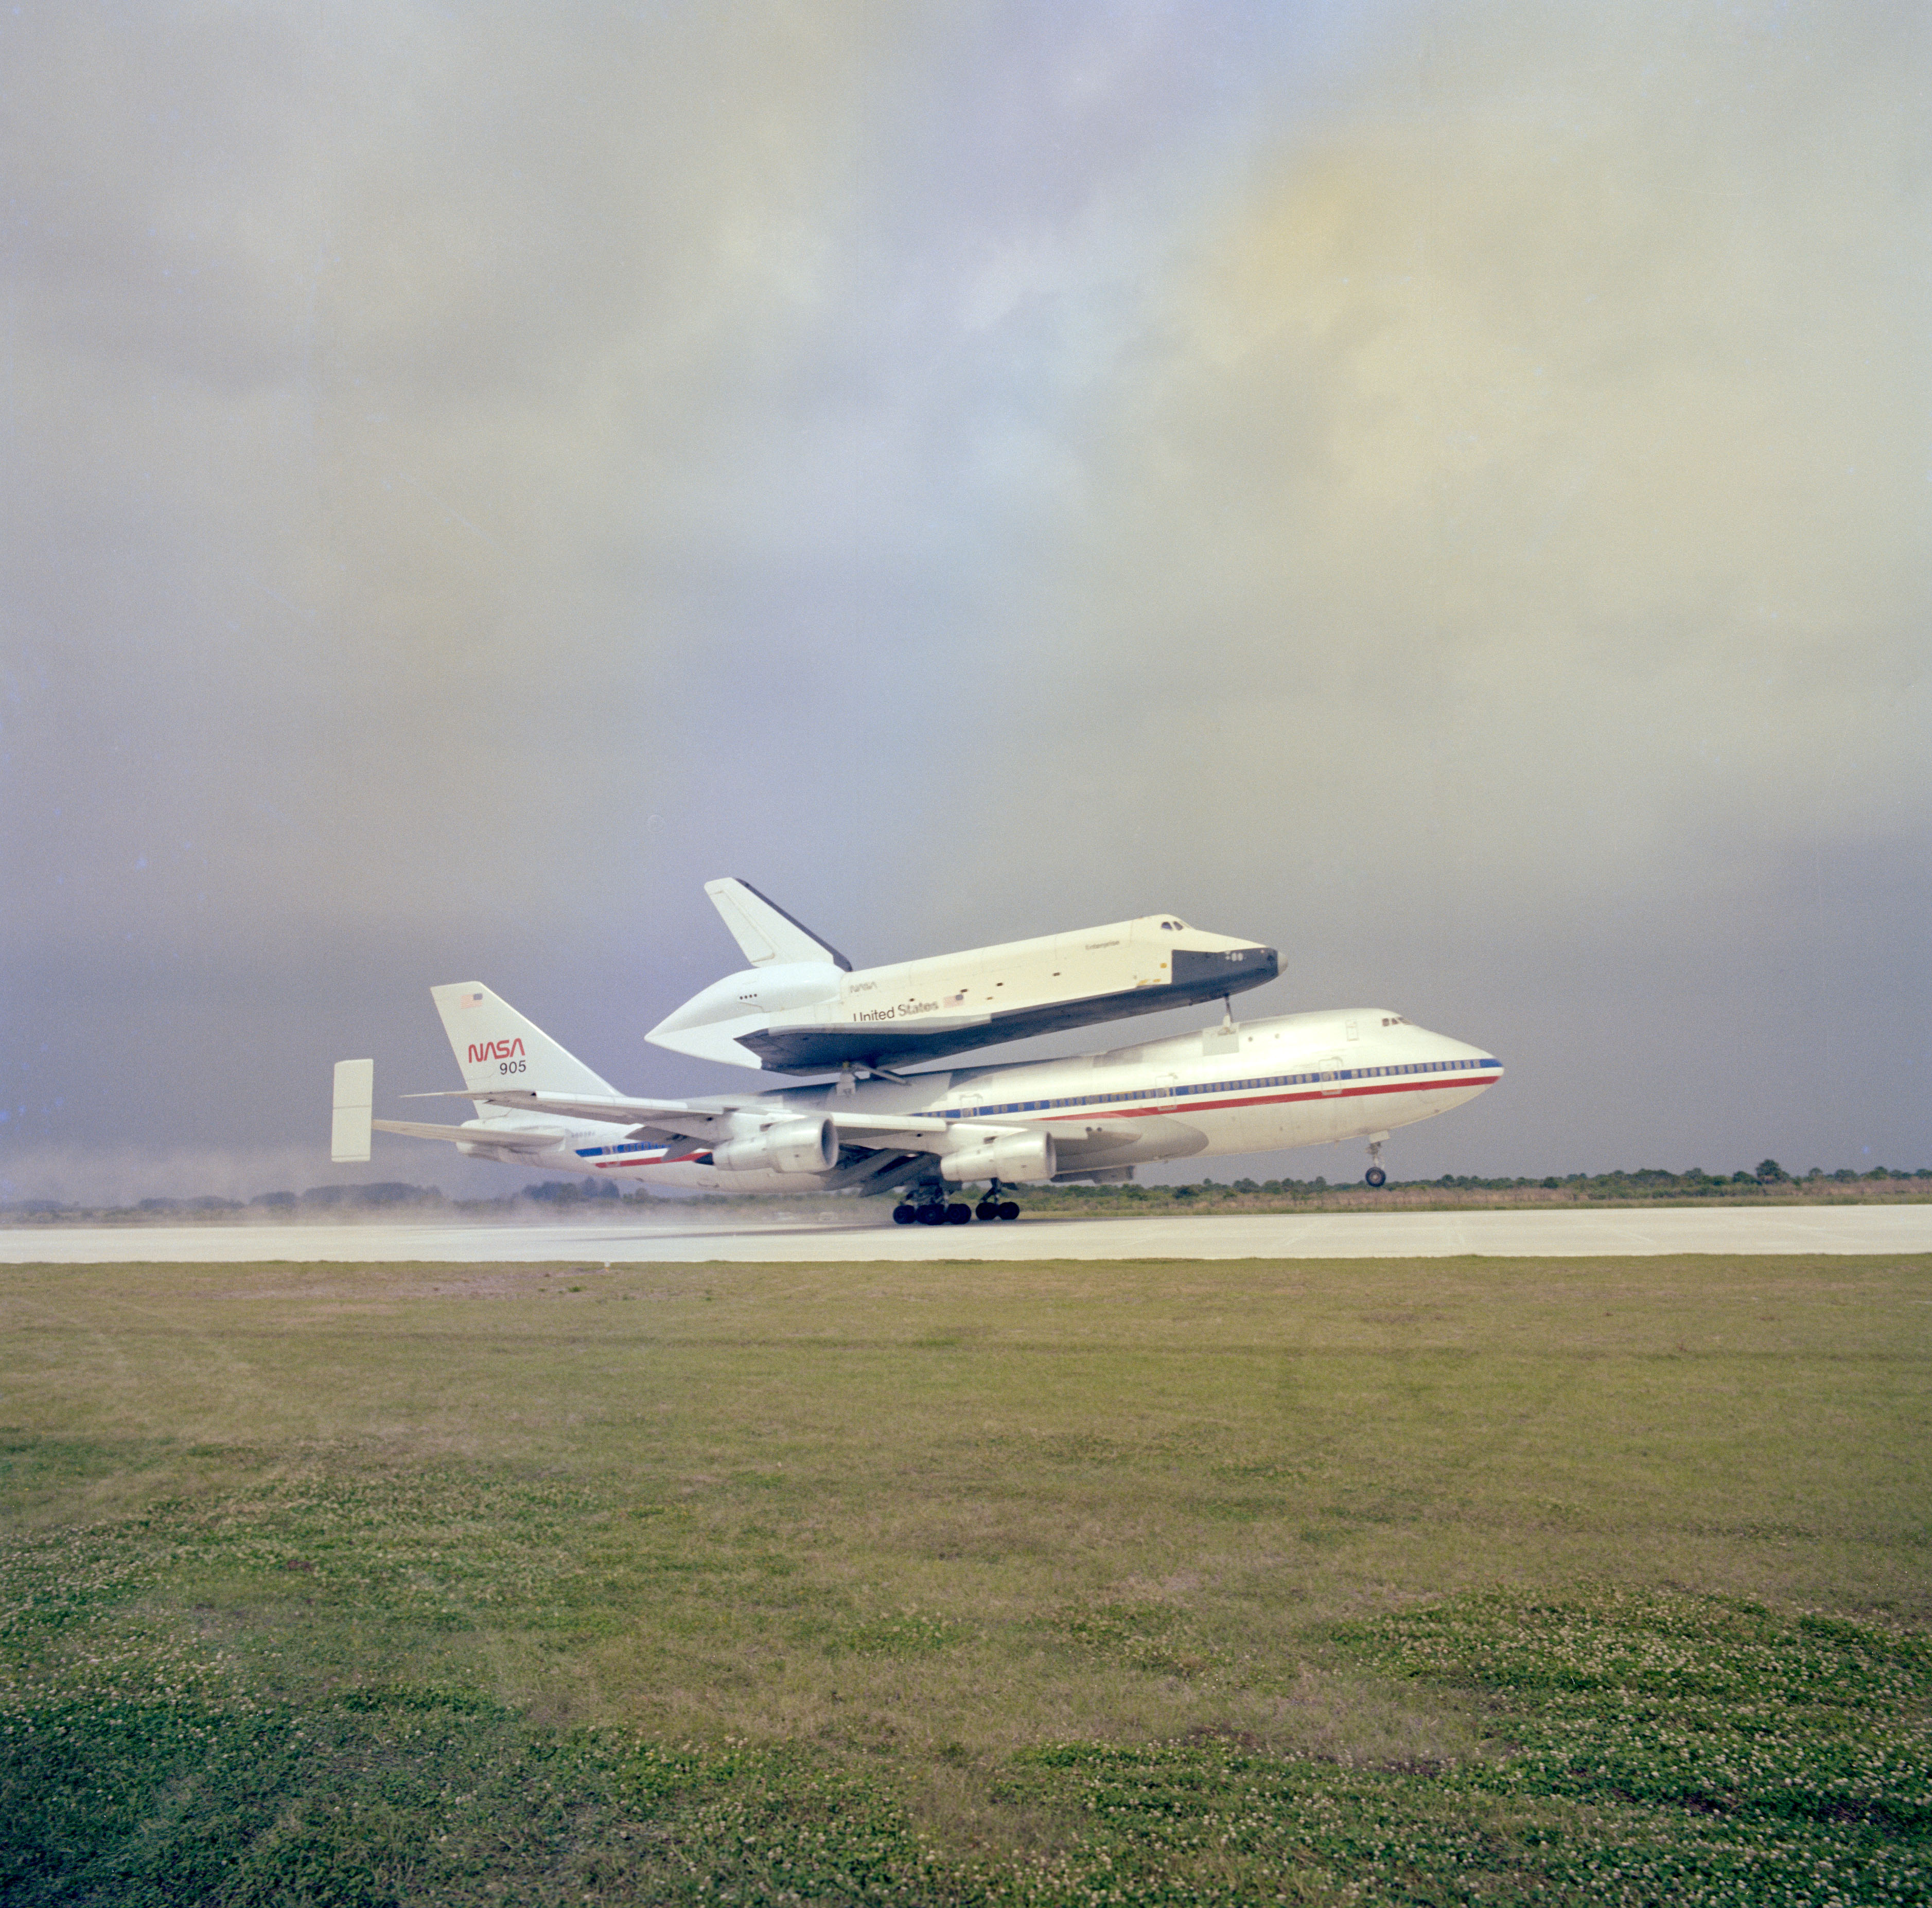 In January 1977, workers trucked Enterprise 36 miles overland from Palmdale to NASA’s Dryden, now Armstrong, Flight Research Center at Edwards Air Force Base (AFB) in California, for the ALT program, a series of increasingly complex flights to evaluate the shuttle’s air worthiness. At Dryden, workers placed Enterprise on the back of the Shuttle Carrier Aircraft (SCA), a modified Boeing 747. The duo began taxi runs in February, followed by the first captive inactive flight later that month. The first captive active flight with a crew aboard the orbiter took place in June, and Enterprise made its first independent flight on Aug. 12 with Haise and Fullerton at the controls. Four additional approach and landing flights completed the ALT program by October. In March 1978, Enterprise began its first cross-country trip. Riding atop the SCA, Enterprise left Edwards, and after a weekend stopover at Houston’s Ellington AFB, arrived at the Redstone Arsenal’s airfield in Huntsville, Alabama. Workers trucked Enterprise to the adjacent NASA Marshall Space Flight Center where engineers for the first time mated it with an External Tank (ET) and inert Solid Rocket Boosters (SRB) in the Dynamic Structural Test Facility. For the next year, engineers conducted a series of vibration tests on the combined vehicle, simulating conditions expected during an actual launch.